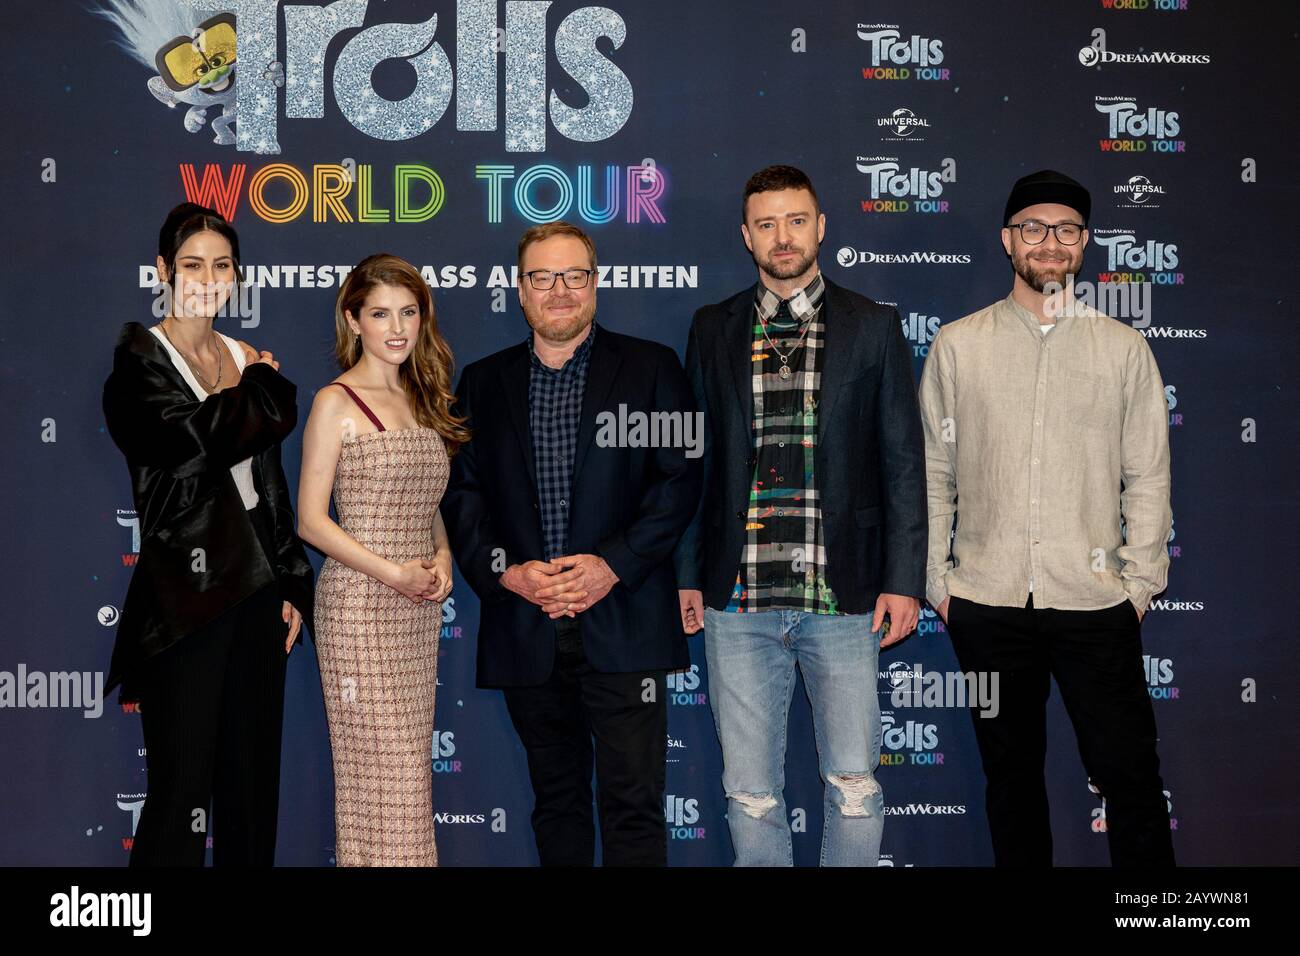 17.02.2020, group photo with Lena Meyer-Landrut (lr), Anna Kendrick, Walt Dohrn, Justin Timberlake and Mark Forster at the photocall for the film Trolls World Tour at the Waldorf Astoria Hotel in Berlin. The new animated film from DreamWorks Animation, distributed by Universal Pictures International Germany, will be launched nationwide on April 23, 2020 in German cinemas. | usage worldwide Stock Photo